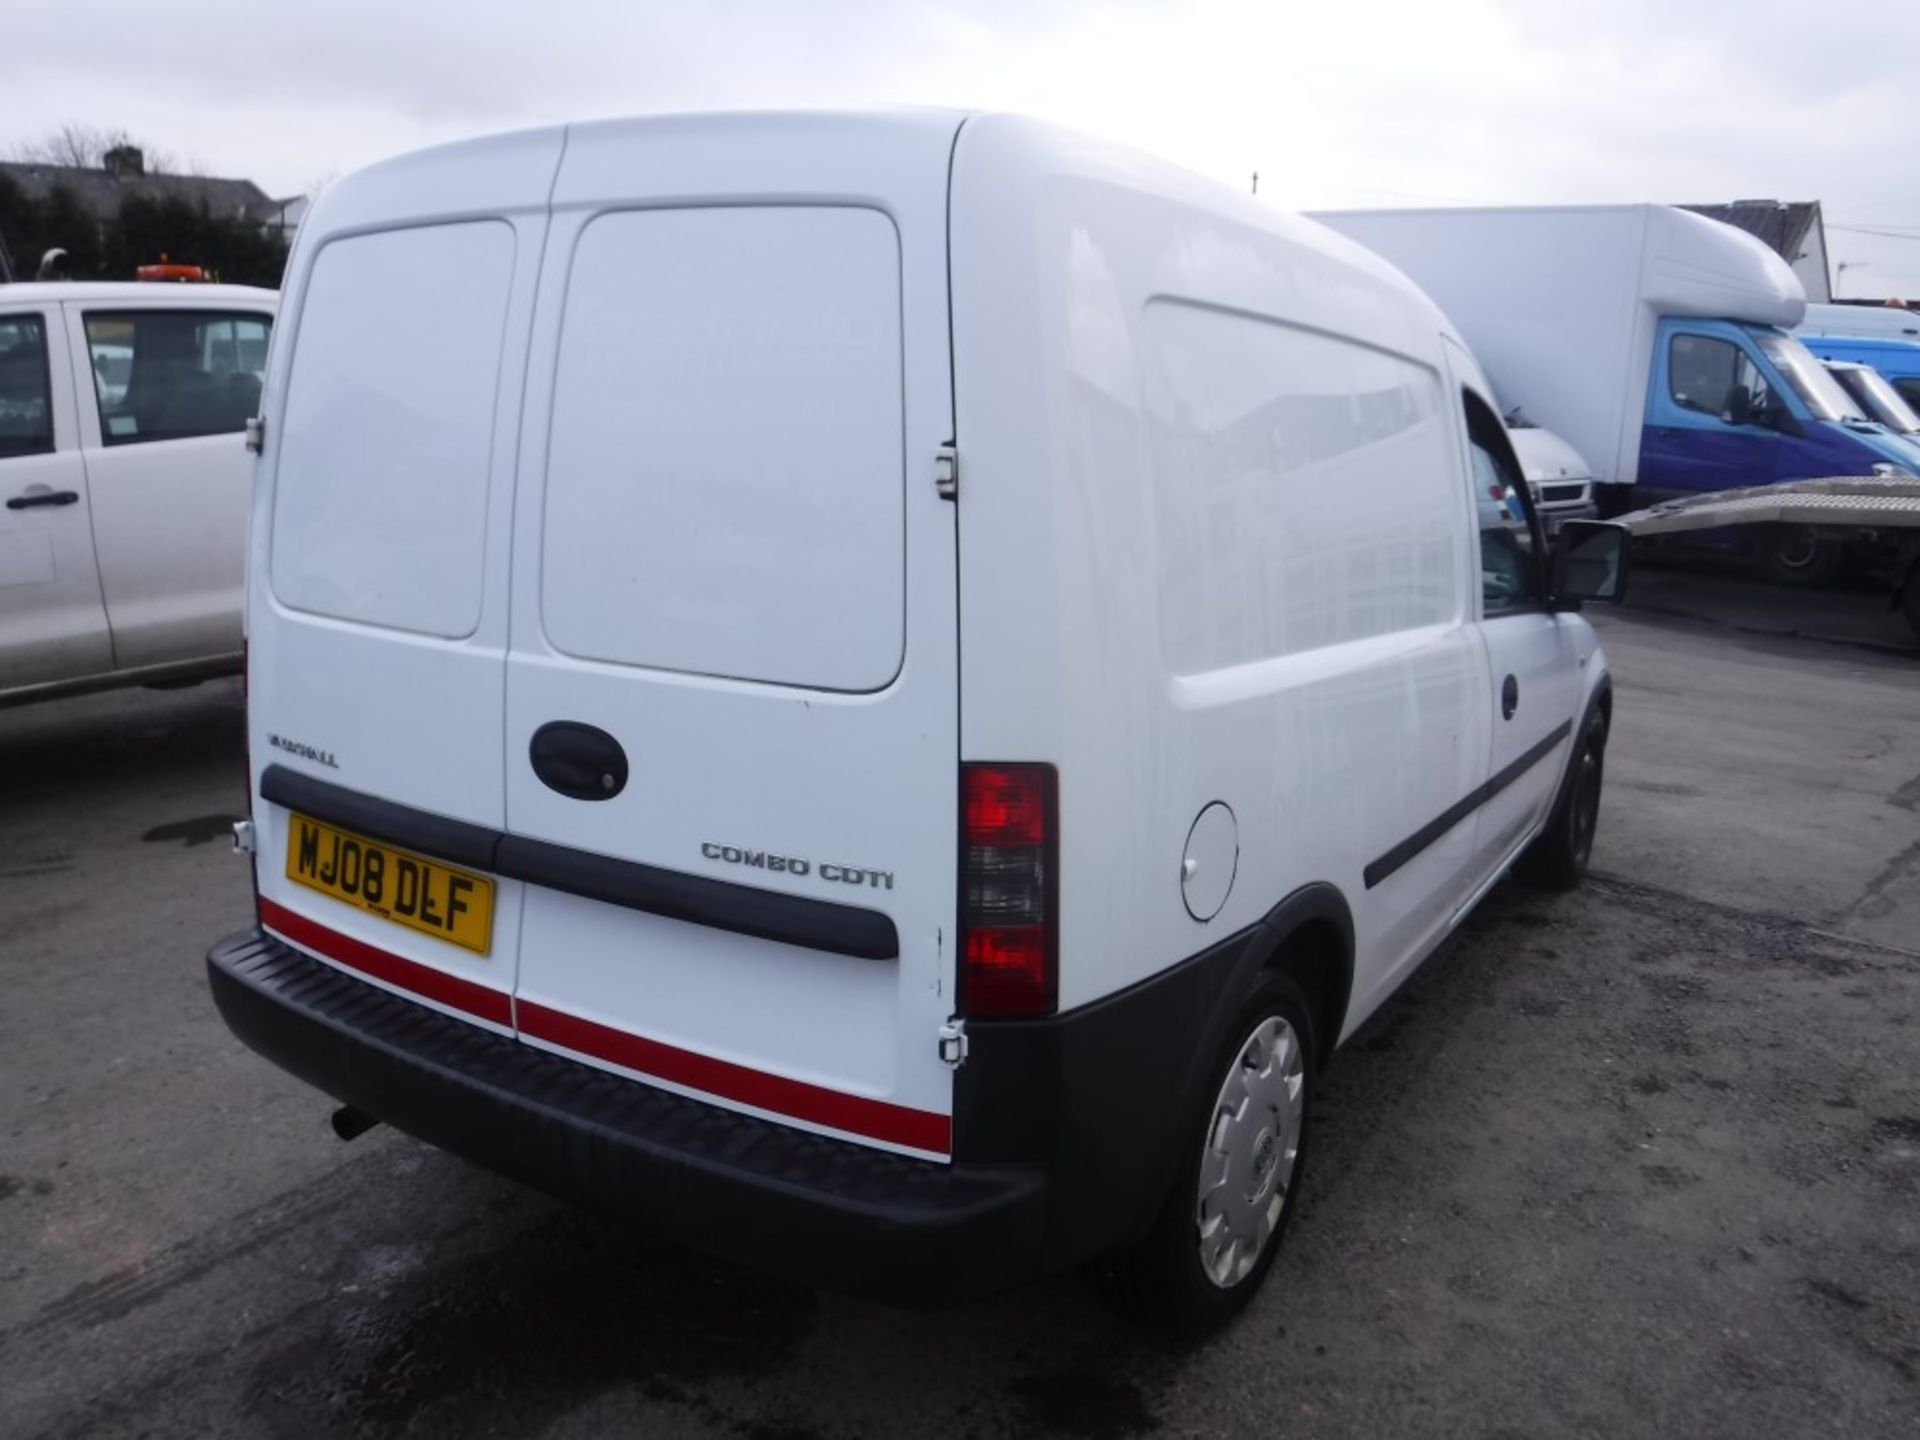 08 reg VAUXHALL COMBO 2000 CDTI VAN (DIRECT ELECTRICITY NW) 1ST REG 04/08, 107616M, V5 HERE, 1 - Image 4 of 5